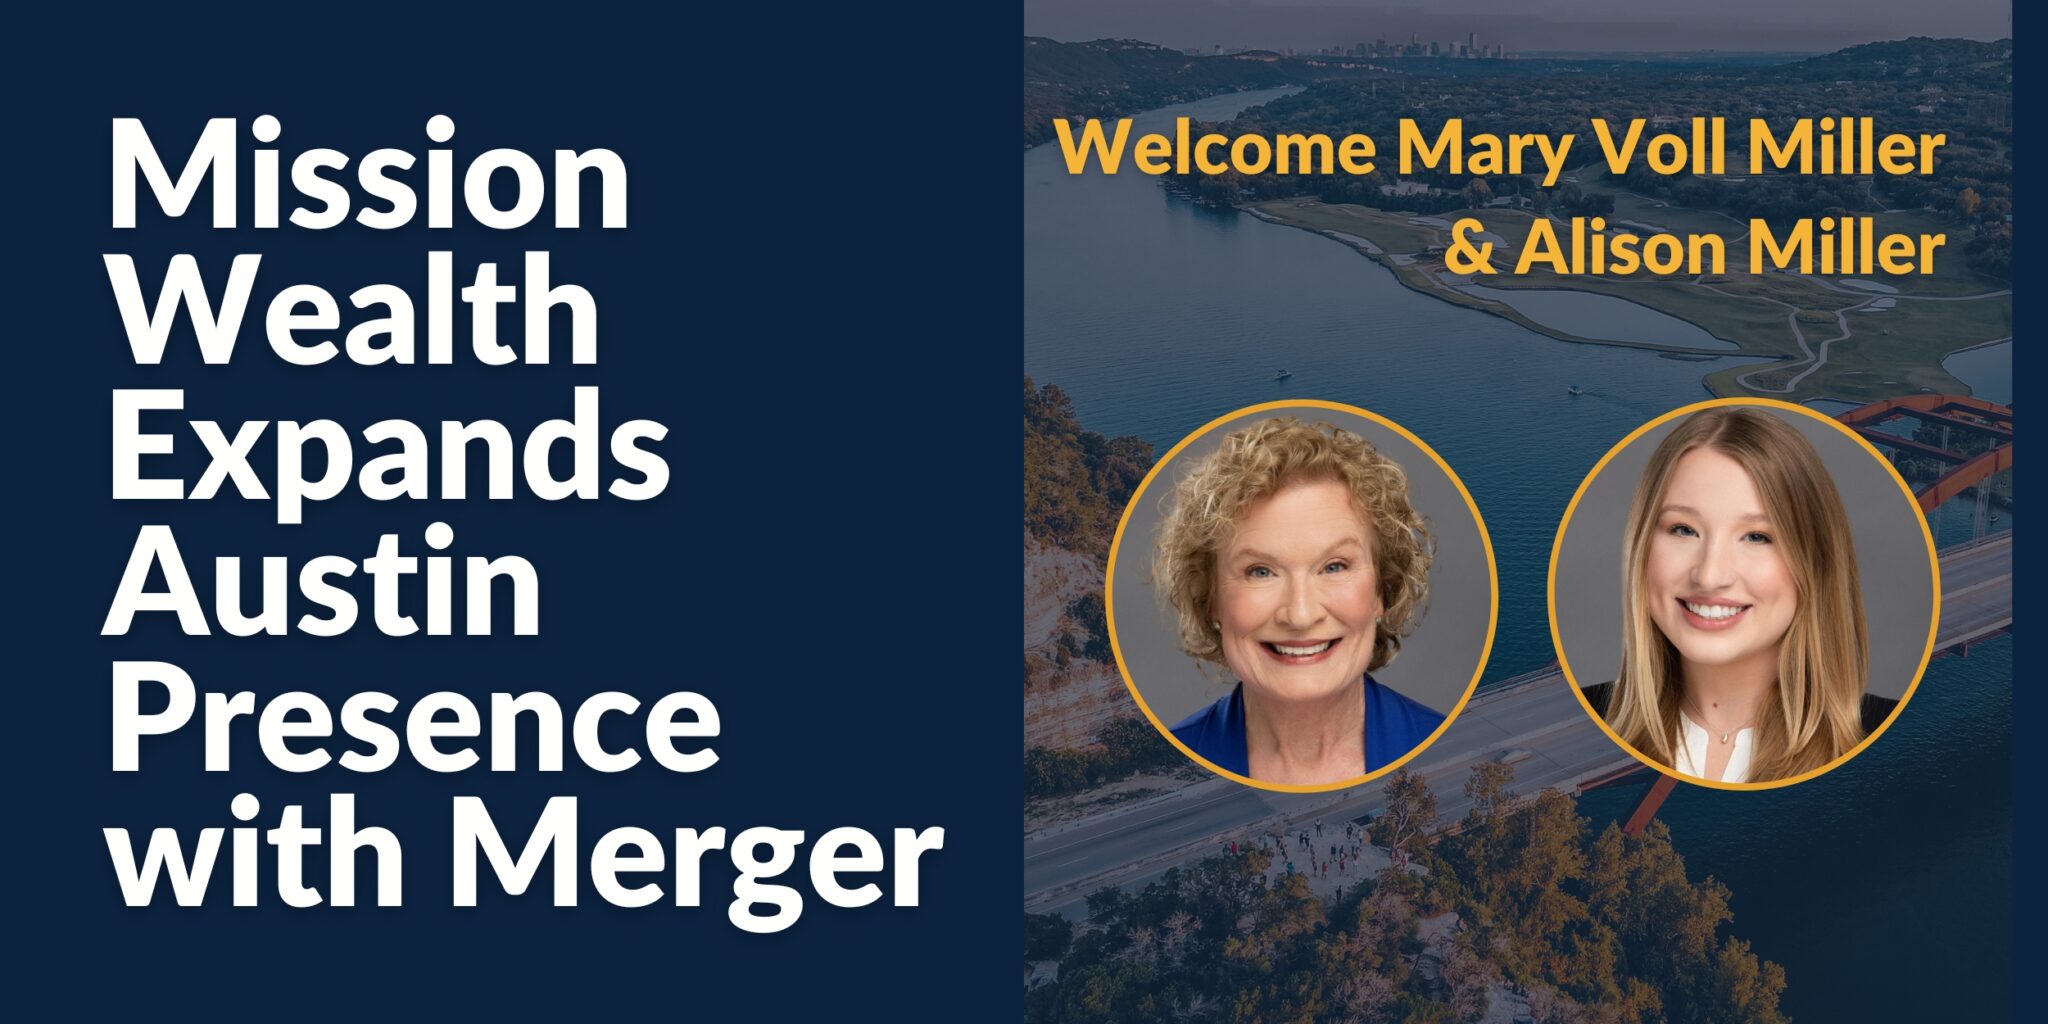 Mary Voll Miller and Alison Miller Merger